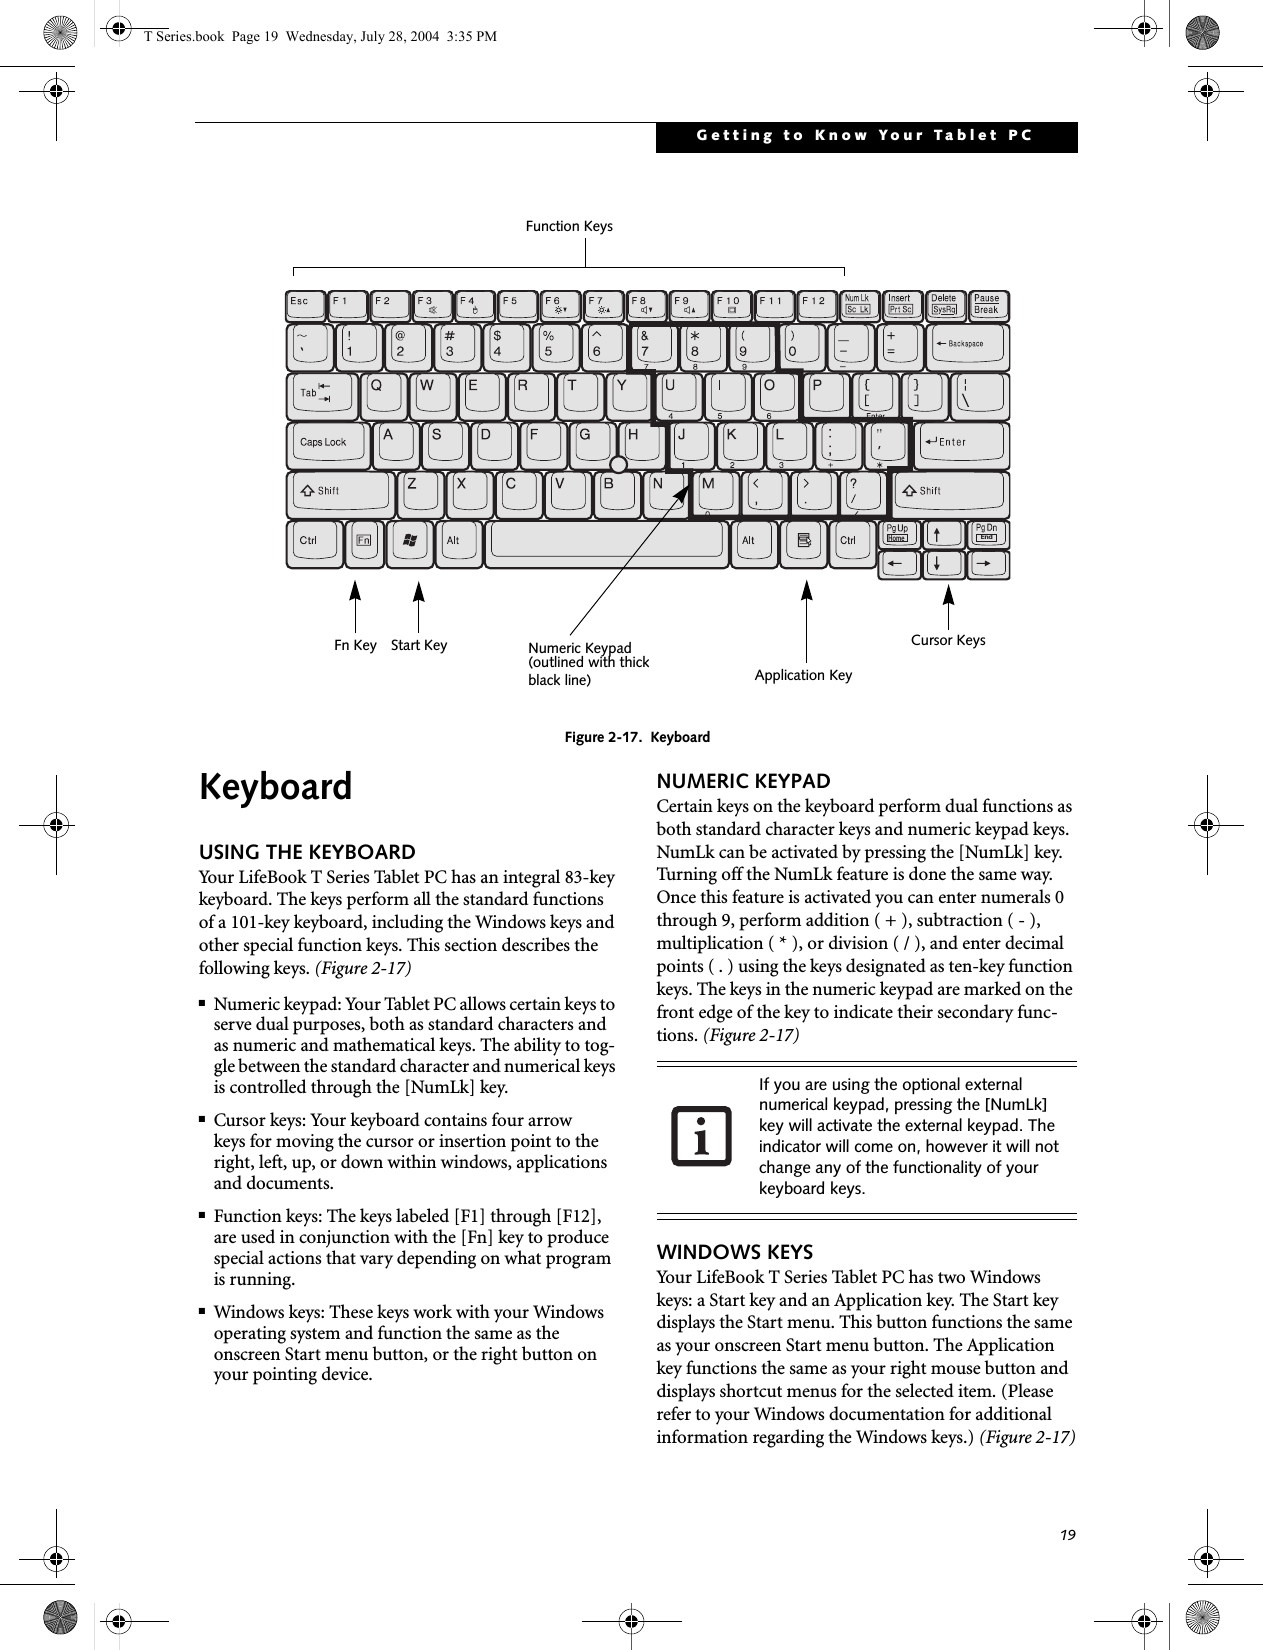 19Getting to Know Your Tablet PCFigure 2-17.  KeyboardKeyboardUSING THE KEYBOARDYour LifeBook T Series Tablet PC has an integral 83-key keyboard. The keys perform all the standard functions of a 101-key keyboard, including the Windows keys and other special function keys. This section describes the following keys. (Figure 2-17)■Numeric keypad: Your Tablet PC allows certain keys to serve dual purposes, both as standard characters and as numeric and mathematical keys. The ability to tog-gle between the standard character and numerical keys is controlled through the [NumLk] key.■Cursor keys: Your keyboard contains four arrowkeys for moving the cursor or insertion point to the right, left, up, or down within windows, applications and documents. ■Function keys: The keys labeled [F1] through [F12], are used in conjunction with the [Fn] key to produce special actions that vary depending on what program is running. ■Windows keys: These keys work with your Windows operating system and function the same as the onscreen Start menu button, or the right button on your pointing device.NUMERIC KEYPADCertain keys on the keyboard perform dual functions as both standard character keys and numeric keypad keys. NumLk can be activated by pressing the [NumLk] key. Turning off the NumLk feature is done the same way. Once this feature is activated you can enter numerals 0 through 9, perform addition ( + ), subtraction ( - ),multiplication ( * ), or division ( / ), and enter decimal points ( . ) using the keys designated as ten-key function keys. The keys in the numeric keypad are marked on the front edge of the key to indicate their secondary func-tions. (Figure 2-17) WINDOWS KEYSYour LifeBook T Series Tablet PC has two Windows keys: a Start key and an Application key. The Start key displays the Start menu. This button functions the same as your onscreen Start menu button. The Application key functions the same as your right mouse button and displays shortcut menus for the selected item. (Please refer to your Windows documentation for additional information regarding the Windows keys.) (Figure 2-17)EndHomeFn Key Start KeyFunction KeysNumeric KeypadApplication KeyCursor Keys(outlined with thickblack line)If you are using the optional external numerical keypad, pressing the [NumLk] key will activate the external keypad. The indicator will come on, however it will not change any of the functionality of your keyboard keys. T Series.book  Page 19  Wednesday, July 28, 2004  3:35 PM